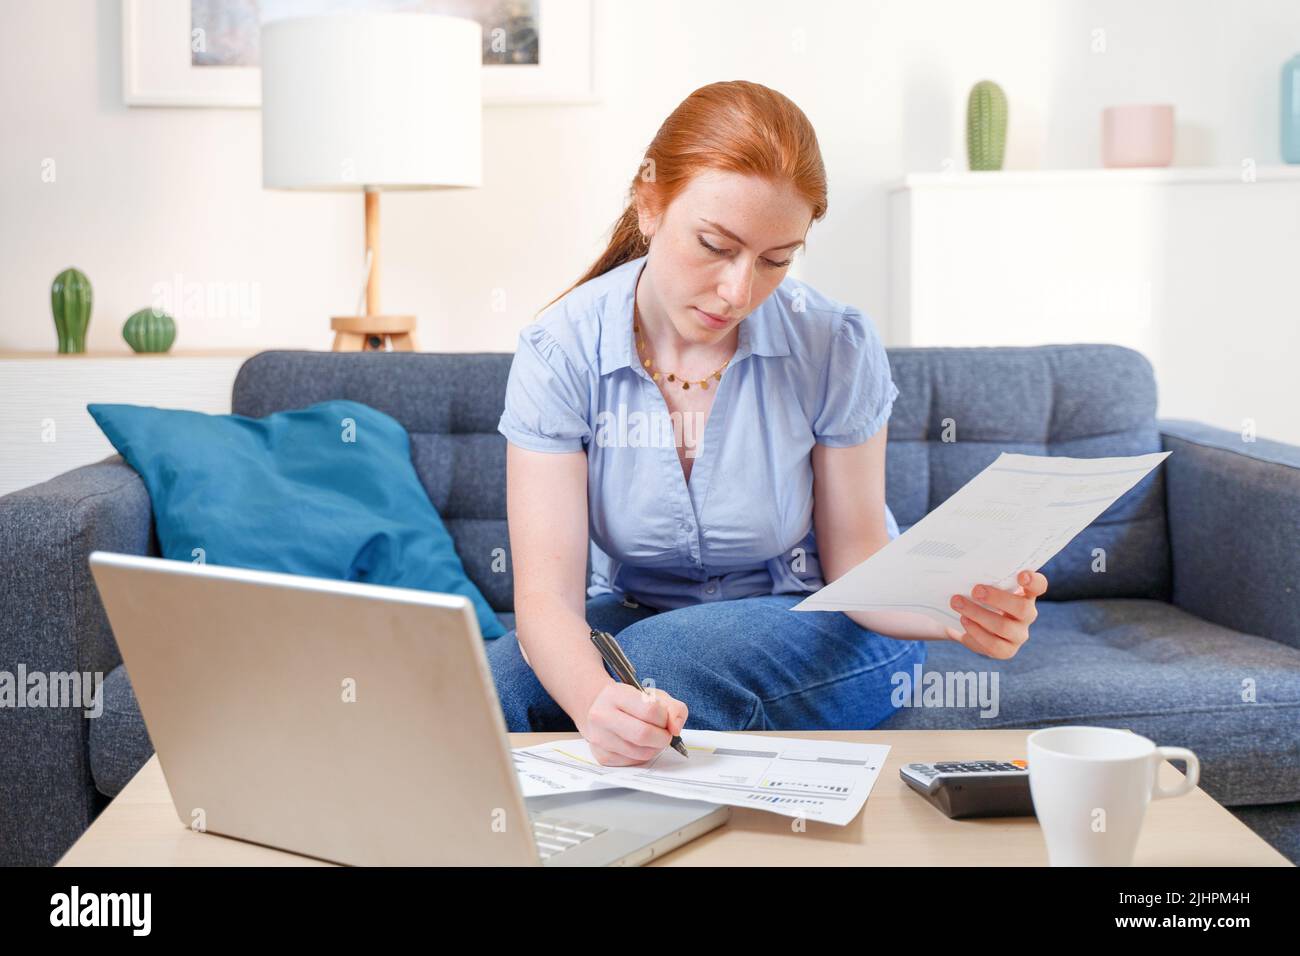 Woman analyzing financial budget with calculator at home Stock Photo